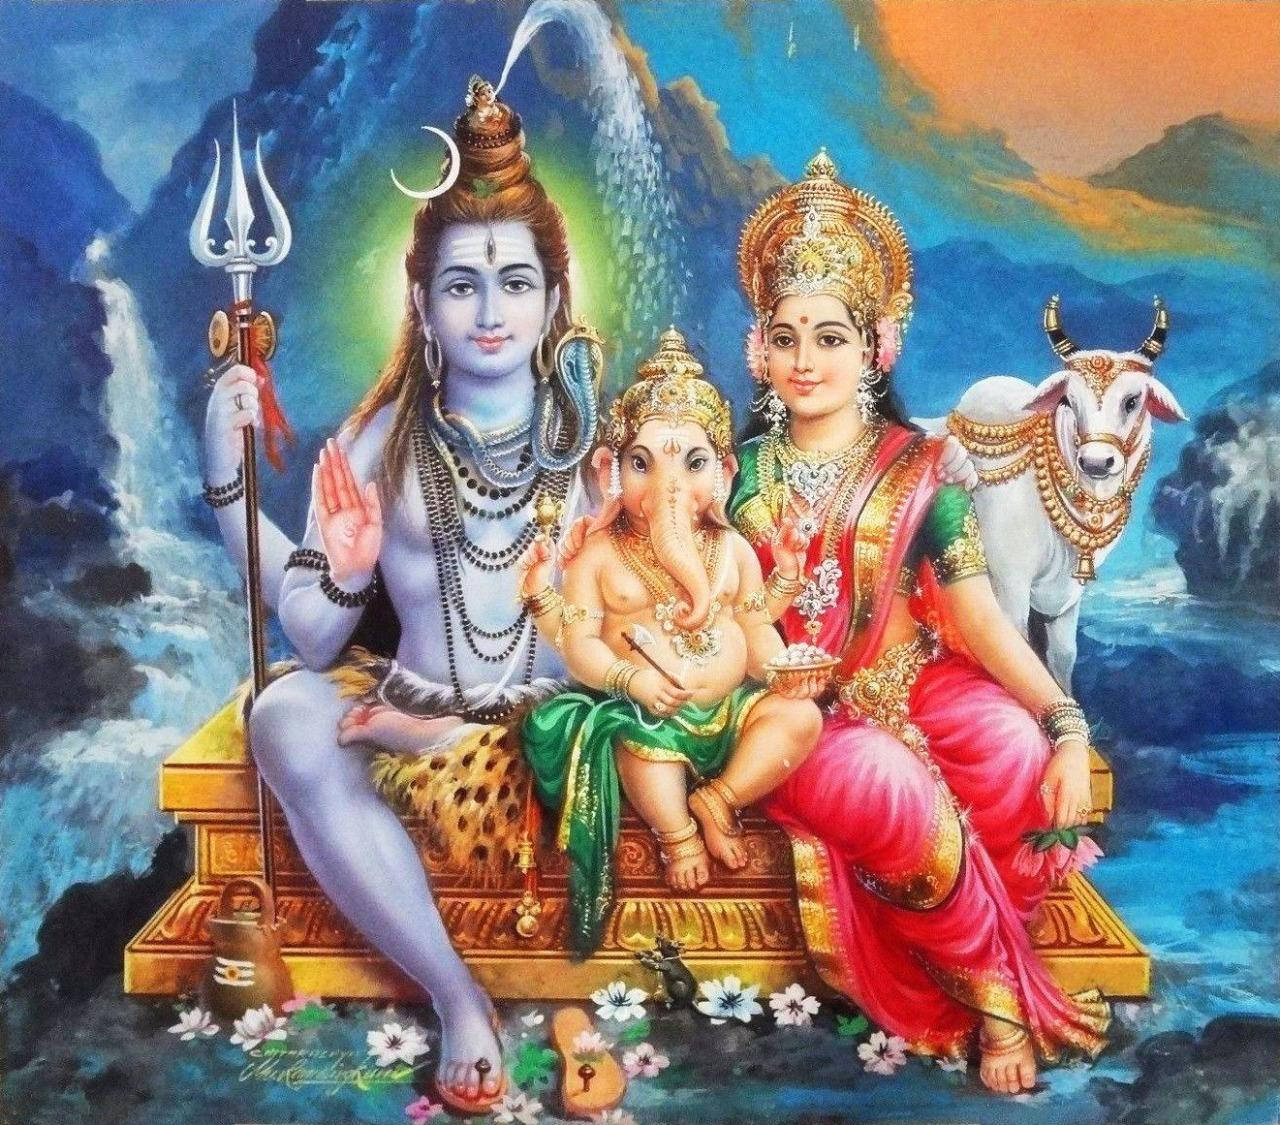 Lord Shiva Familie I Farverige Outfits Wallpaper